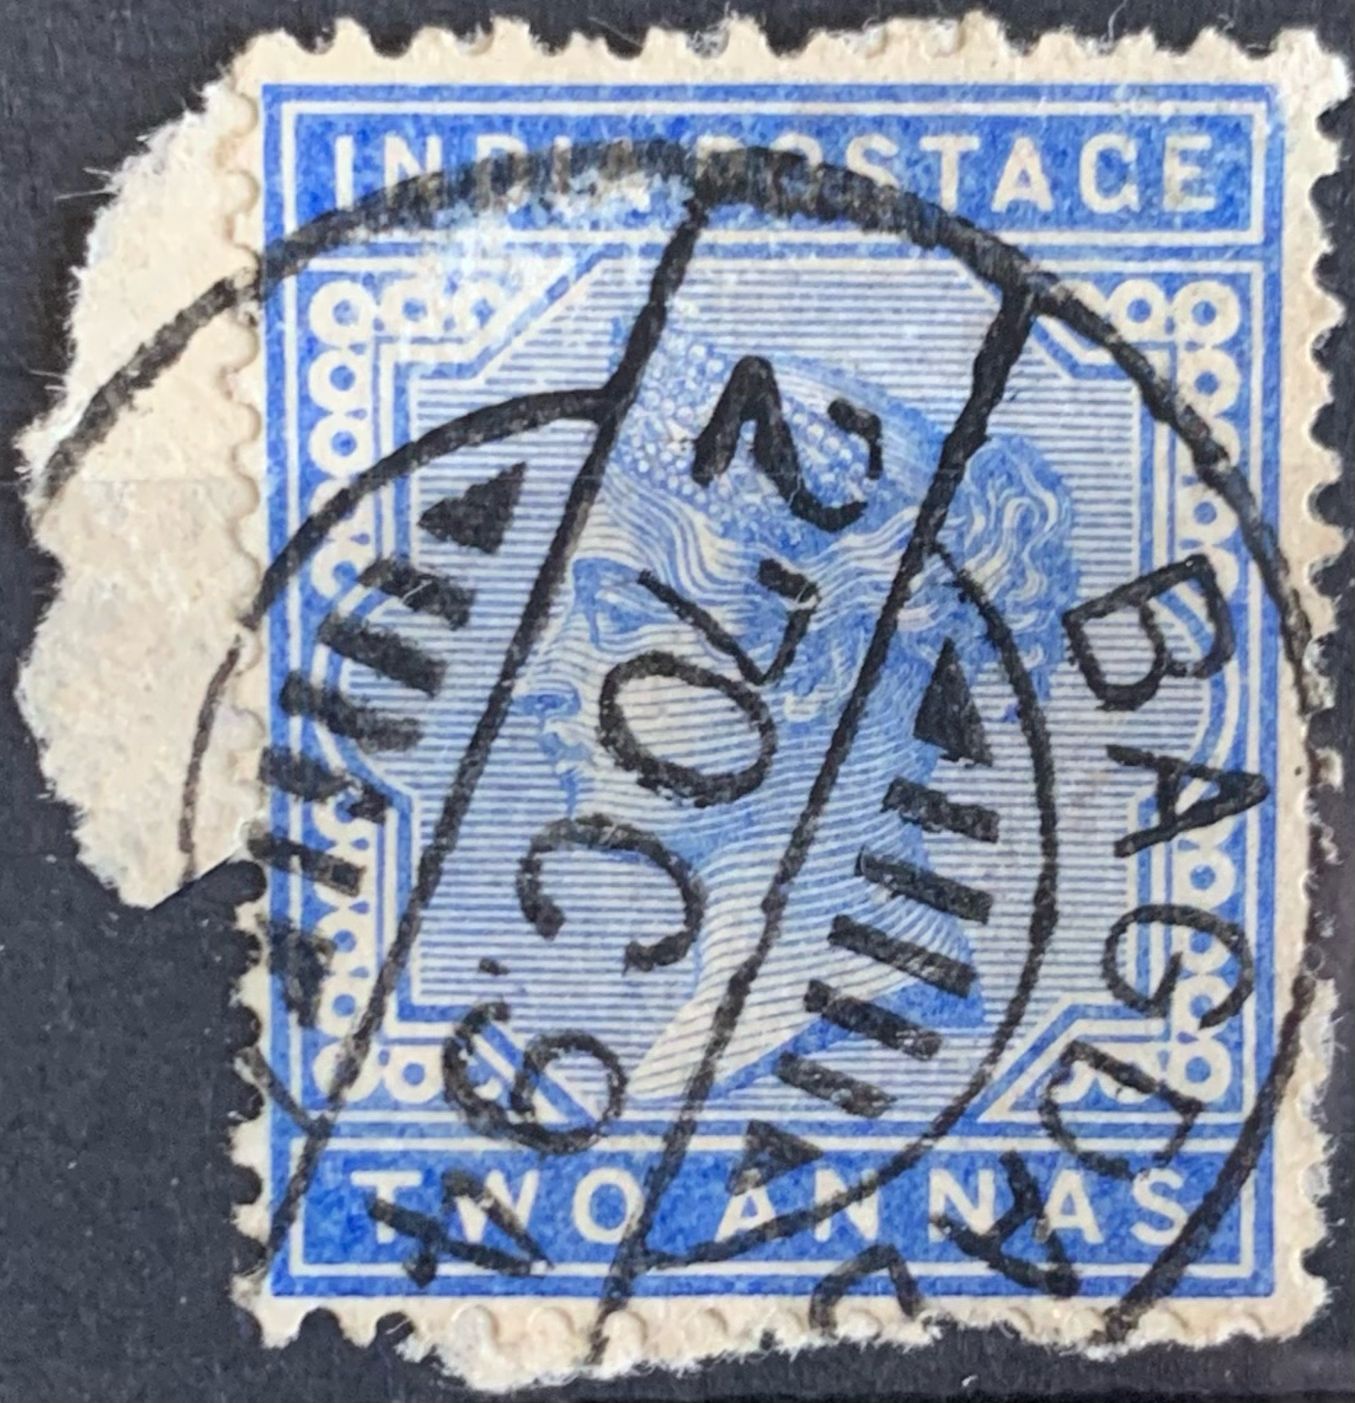 India 1882 QV 2a Used Abroad in BAGDAD Fine Cancelled